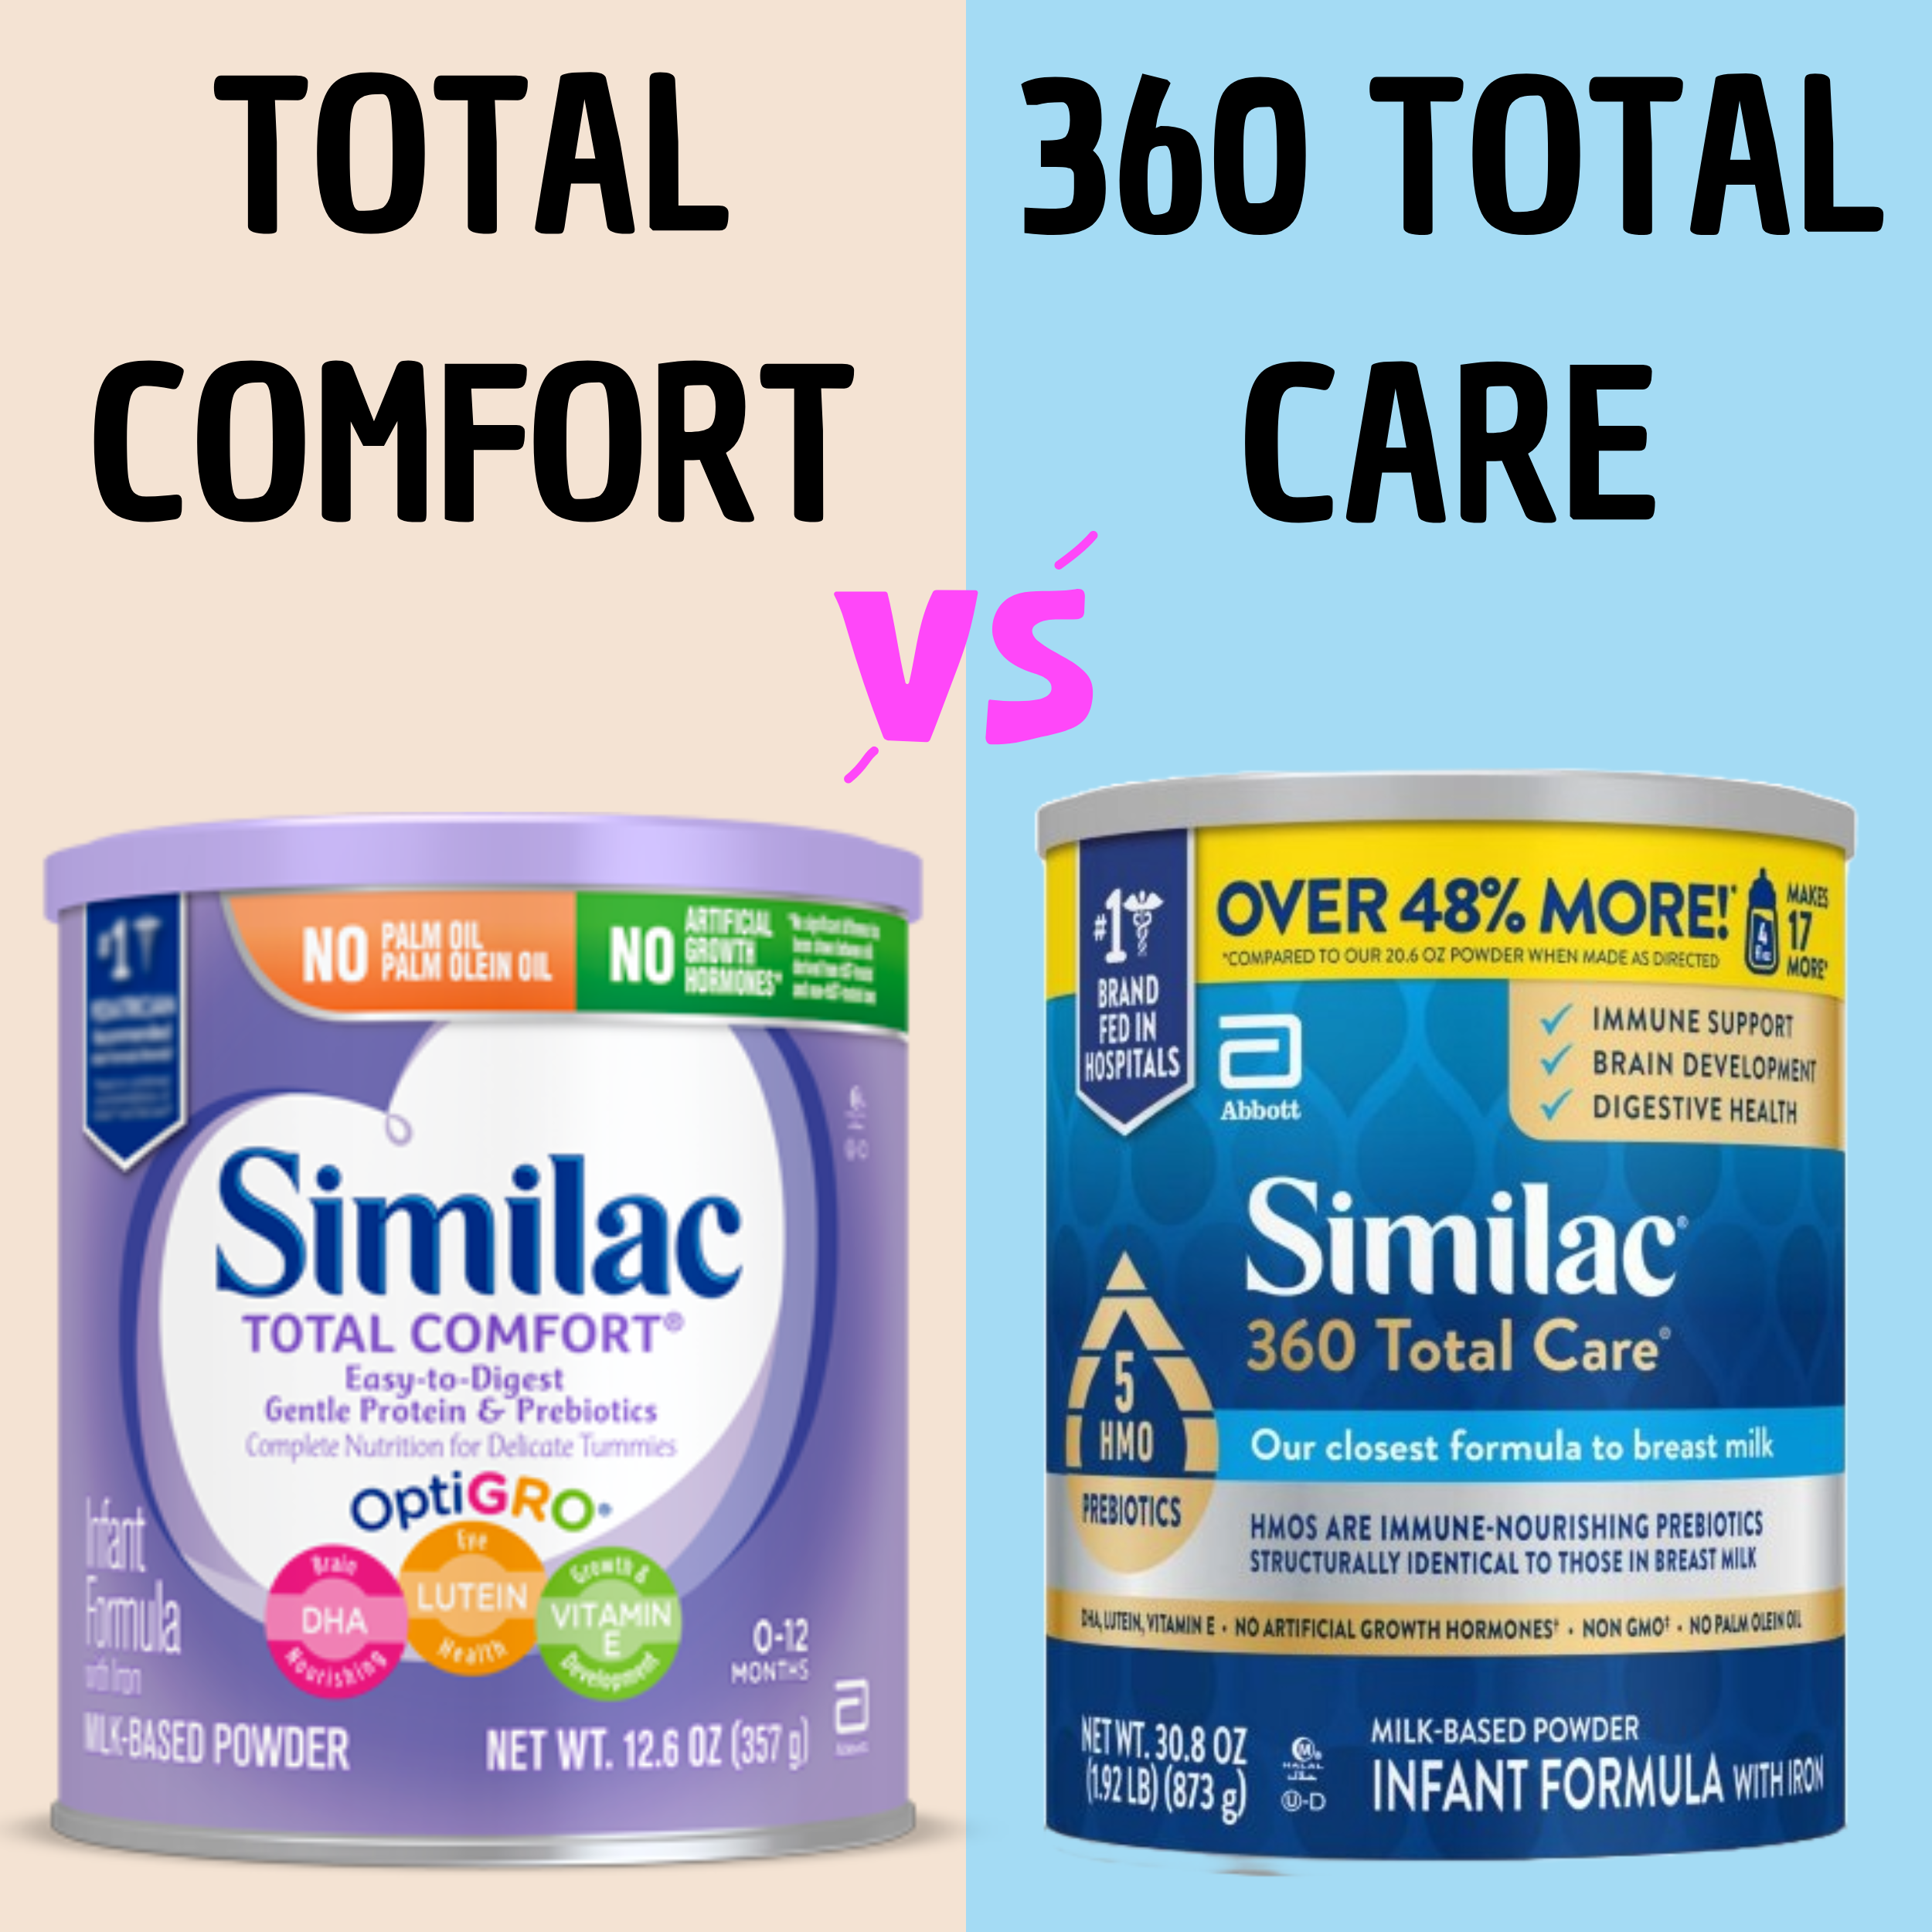 You are currently viewing Similac 360 Total Care Vs Similac Total Comfort: Full Comparison